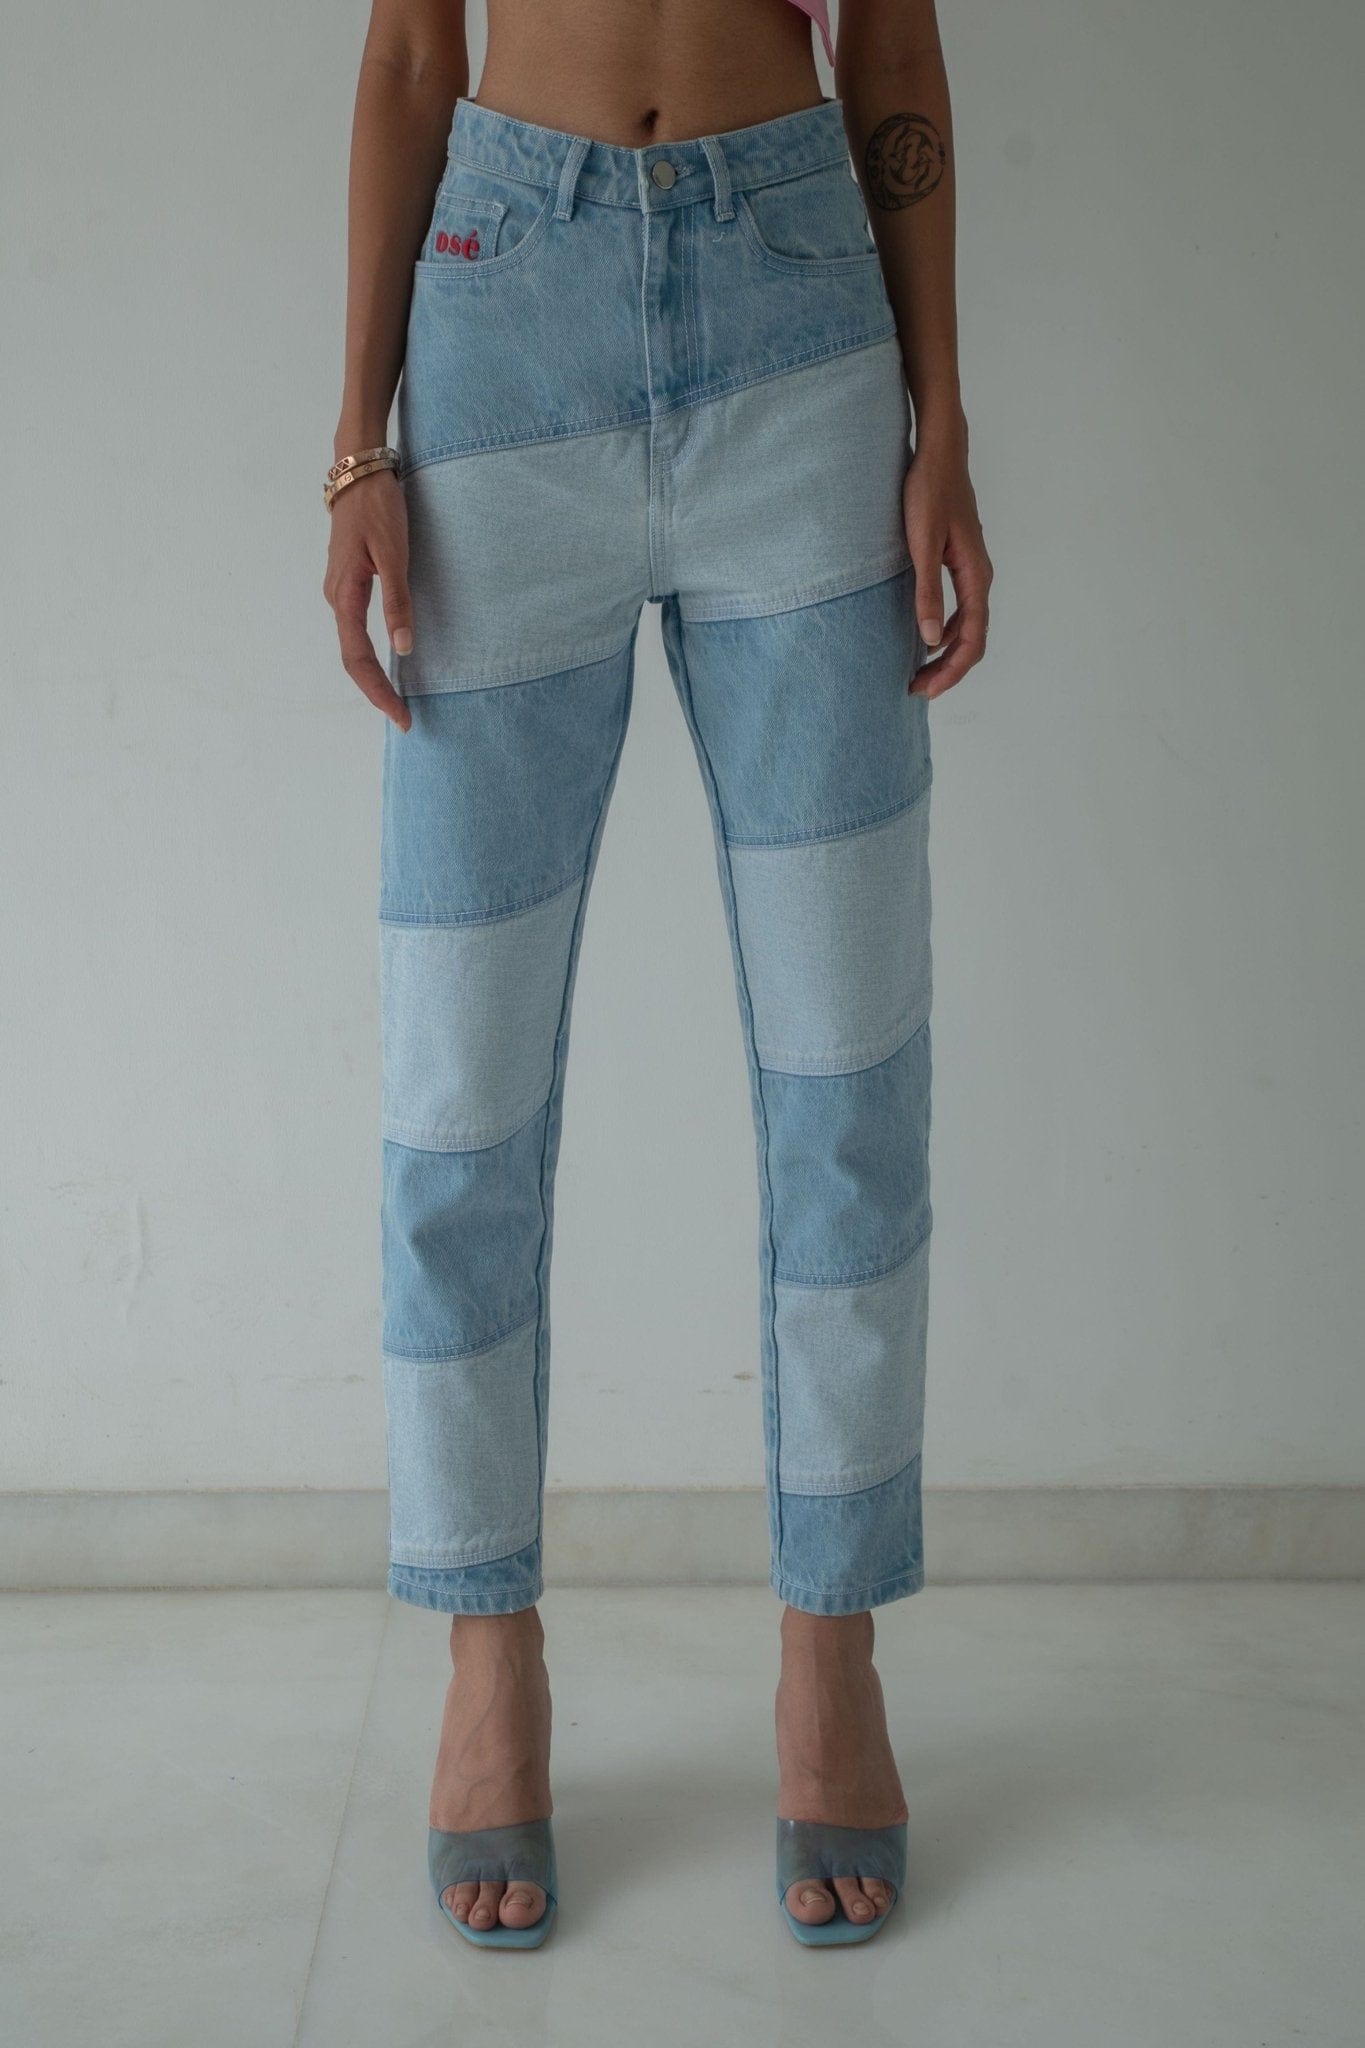 osestudios Clothing Cloud beam jeans